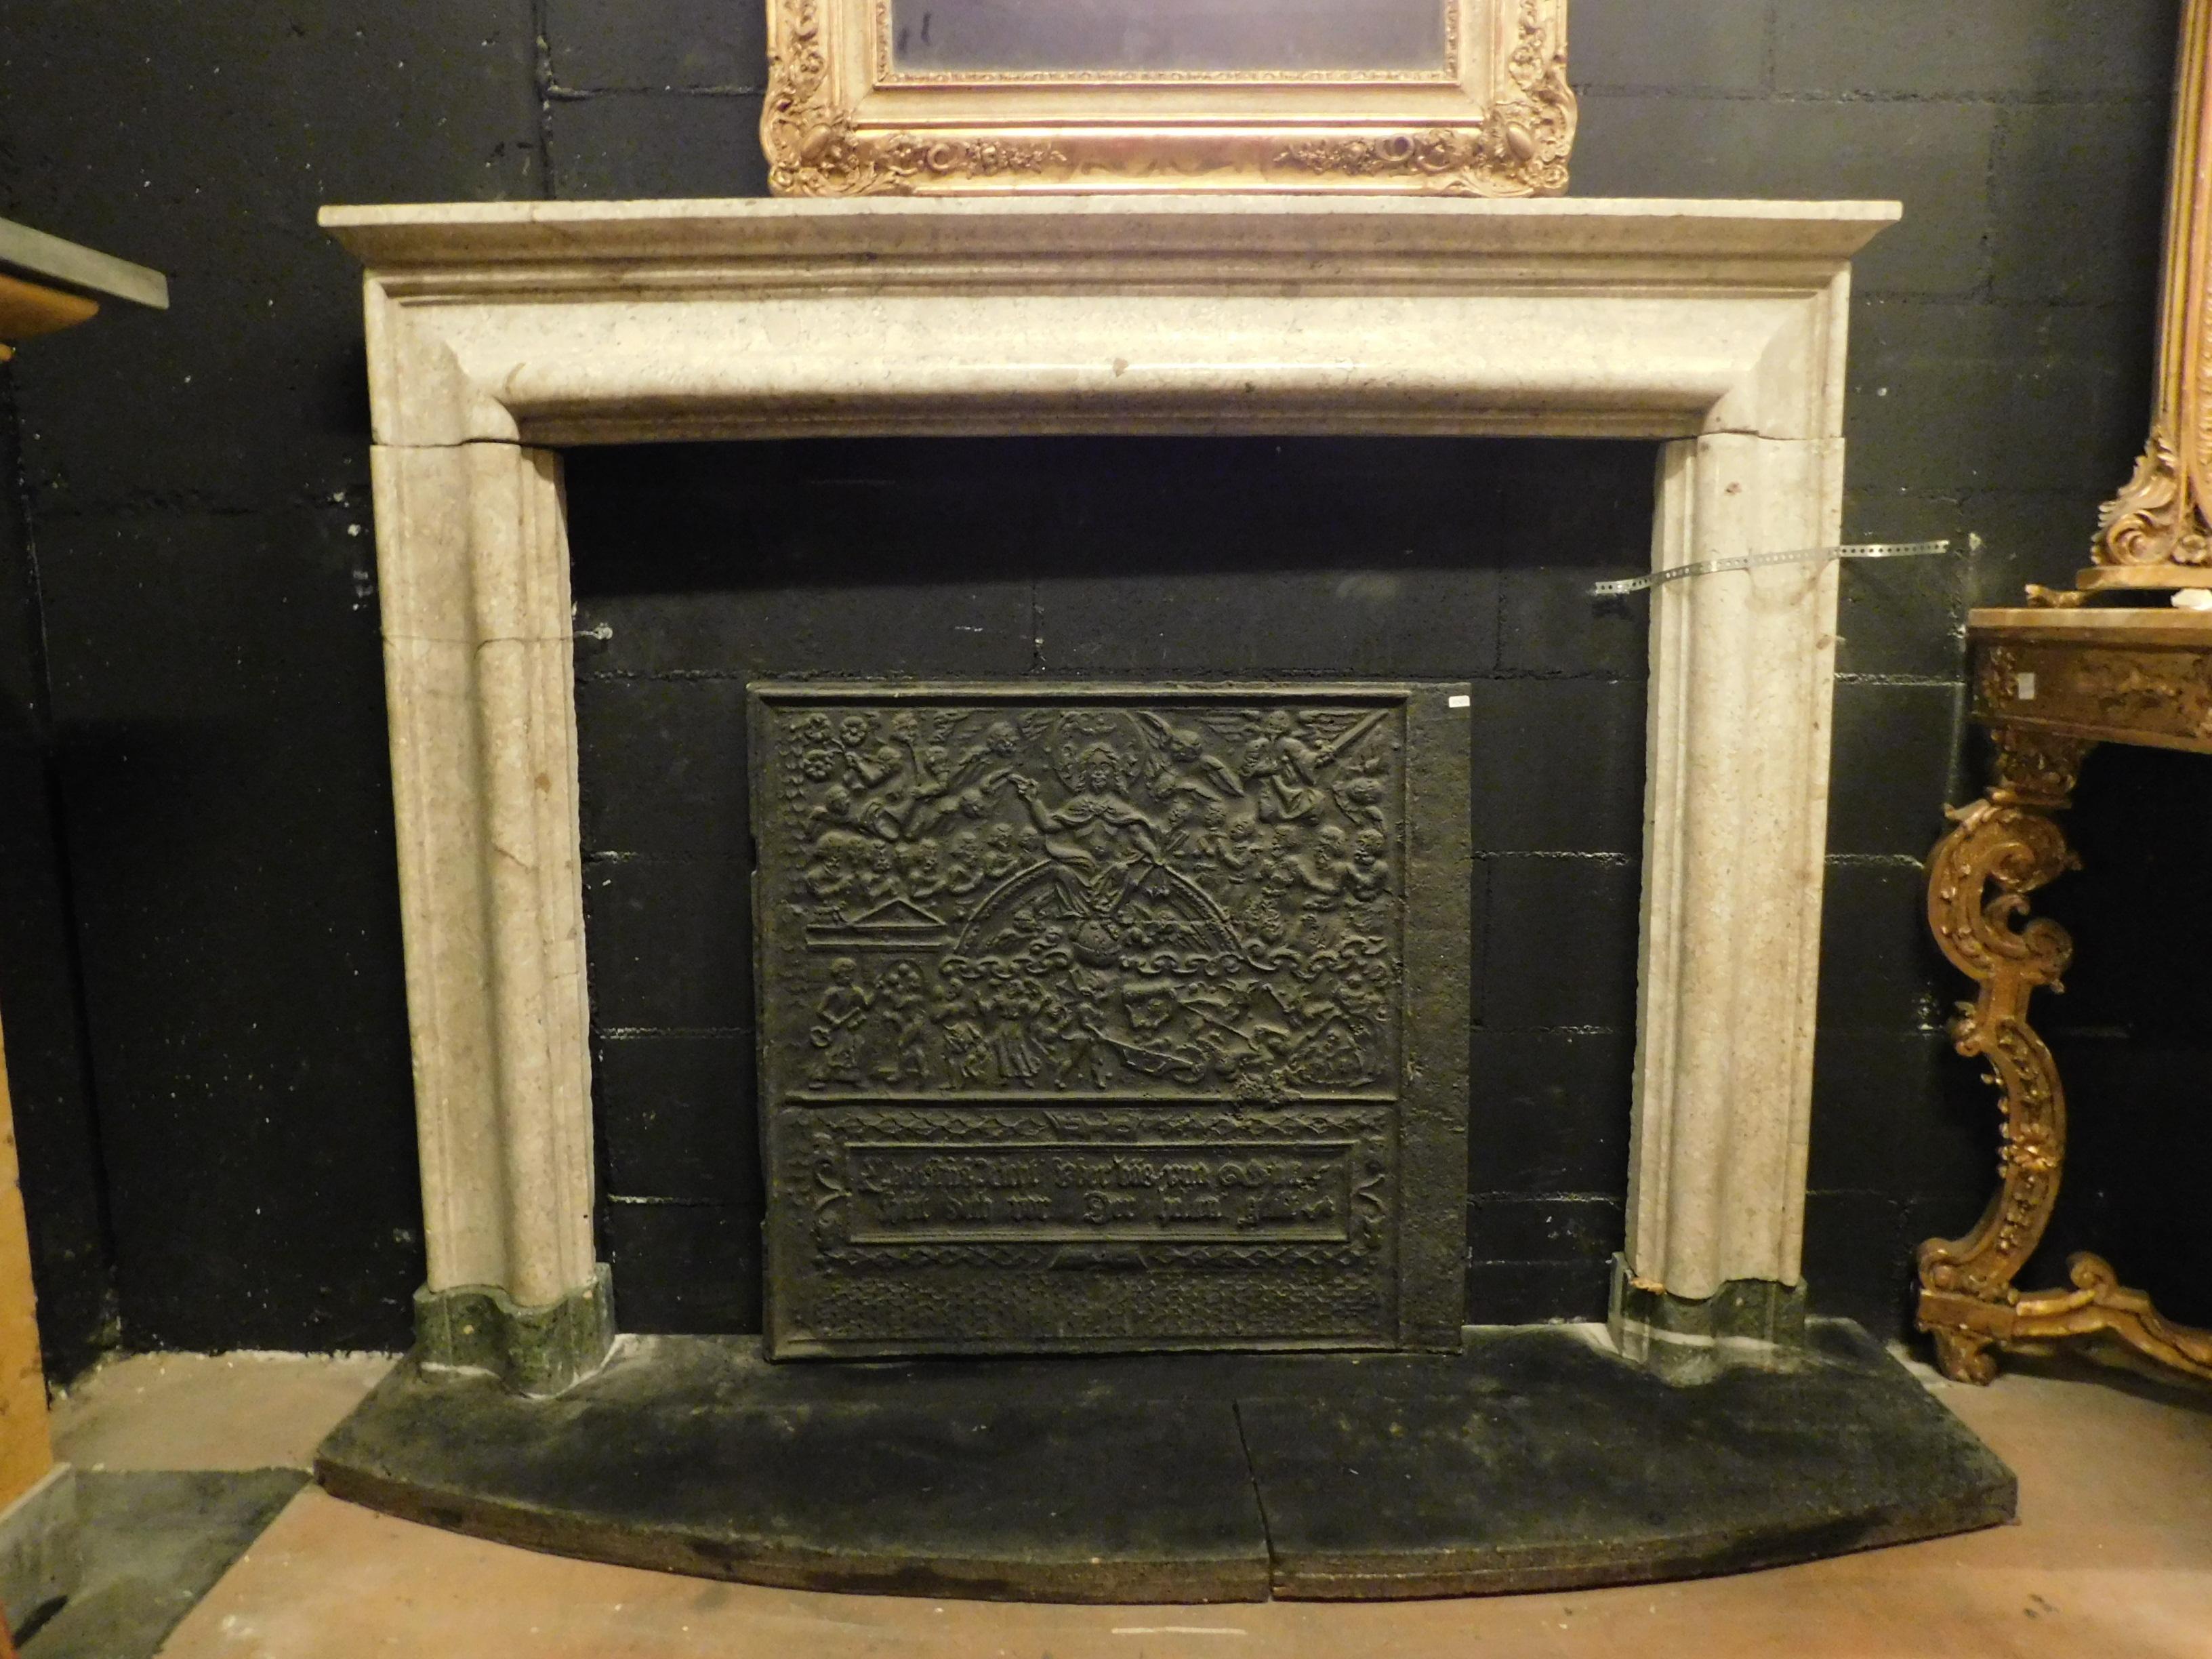 Antique Salvator Rosa fireplace in gray Gassino marble (precious Italian marble) and plinths / feet of the fireplace in green alps marble, built and sculpted by hand in the 17th century, is called Salvator Rosa as it derives from the molura with